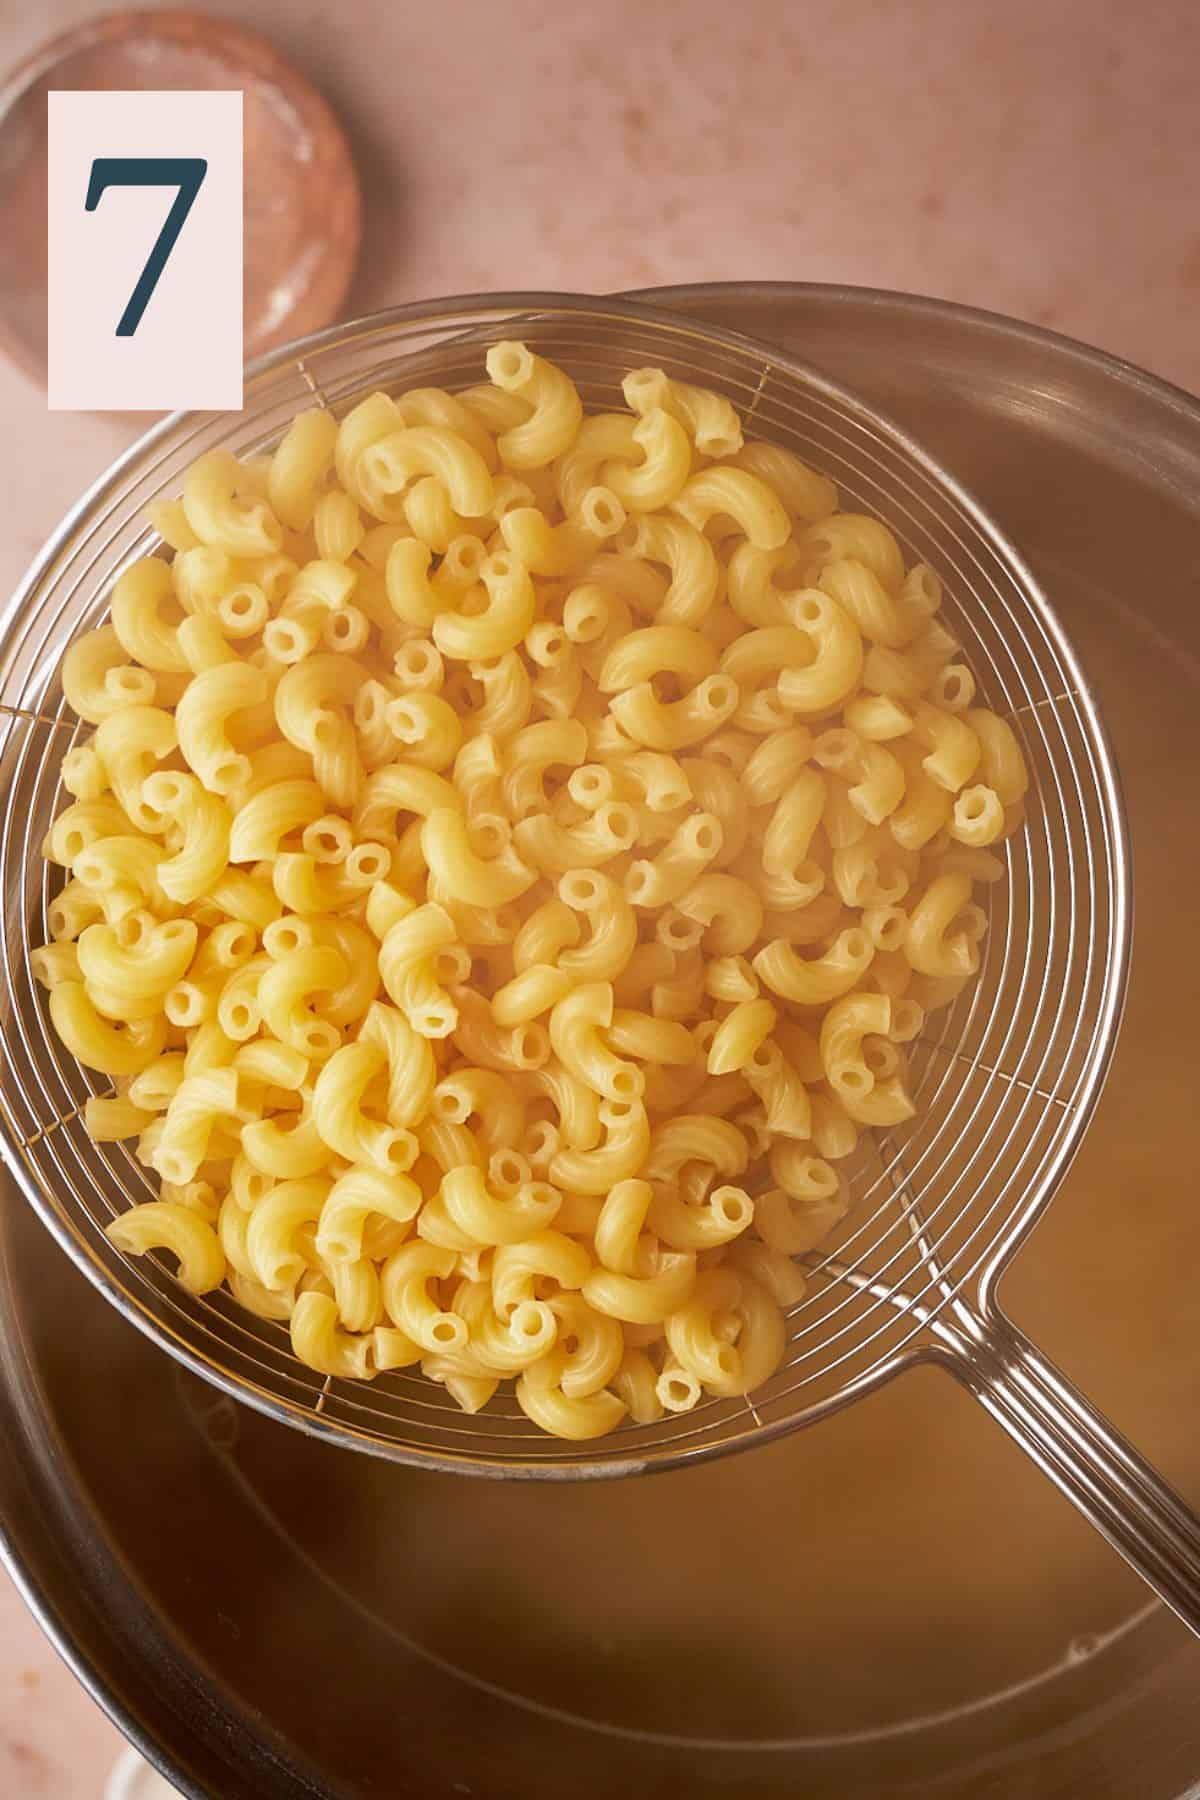 Elbow macaroni cooked to package directions.